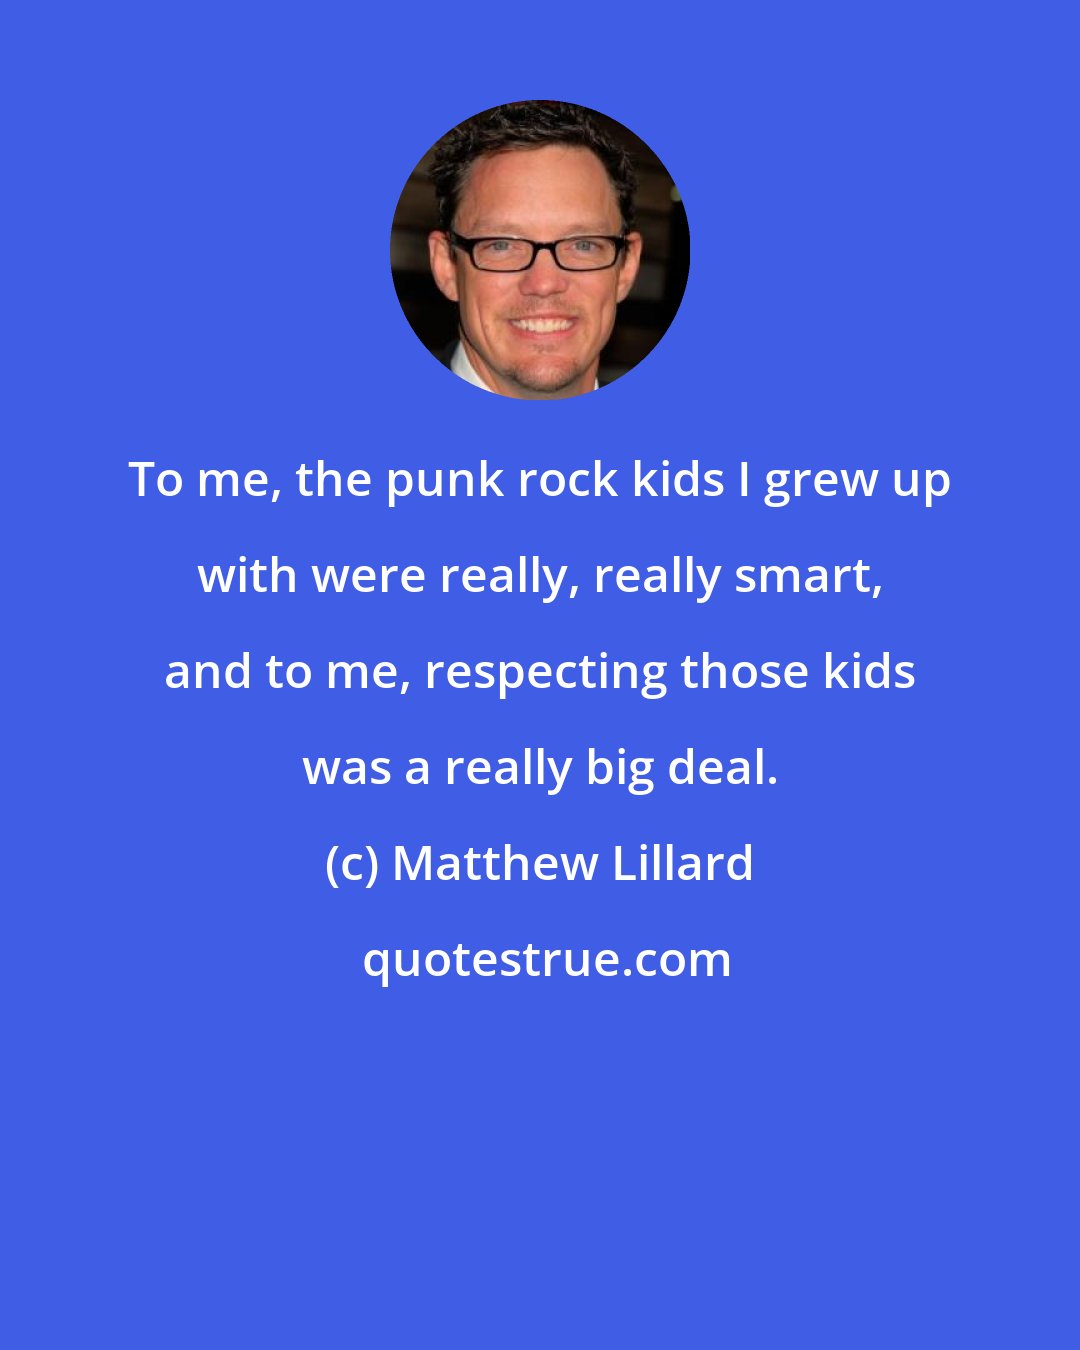 Matthew Lillard: To me, the punk rock kids I grew up with were really, really smart, and to me, respecting those kids was a really big deal.